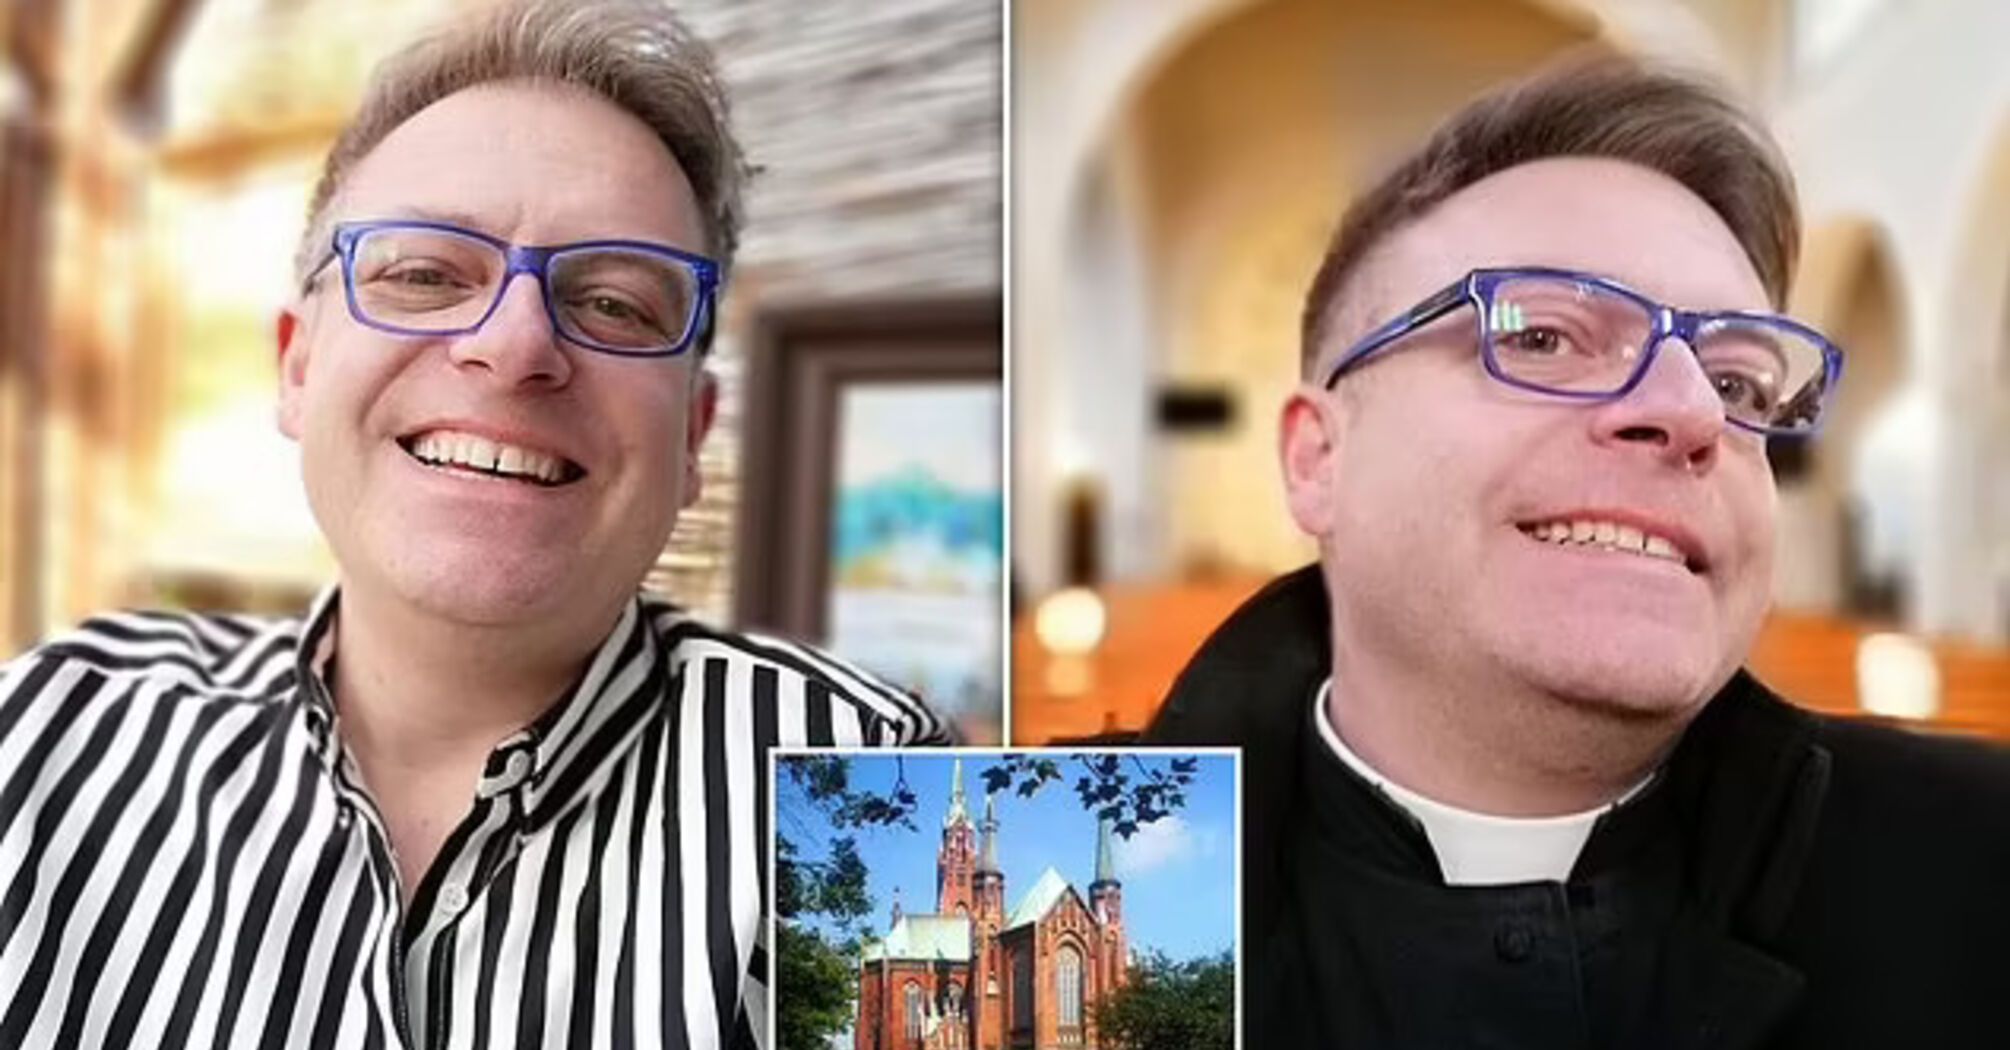 During an unsuccessful gay orgy, the priest did not help a man who overdosed